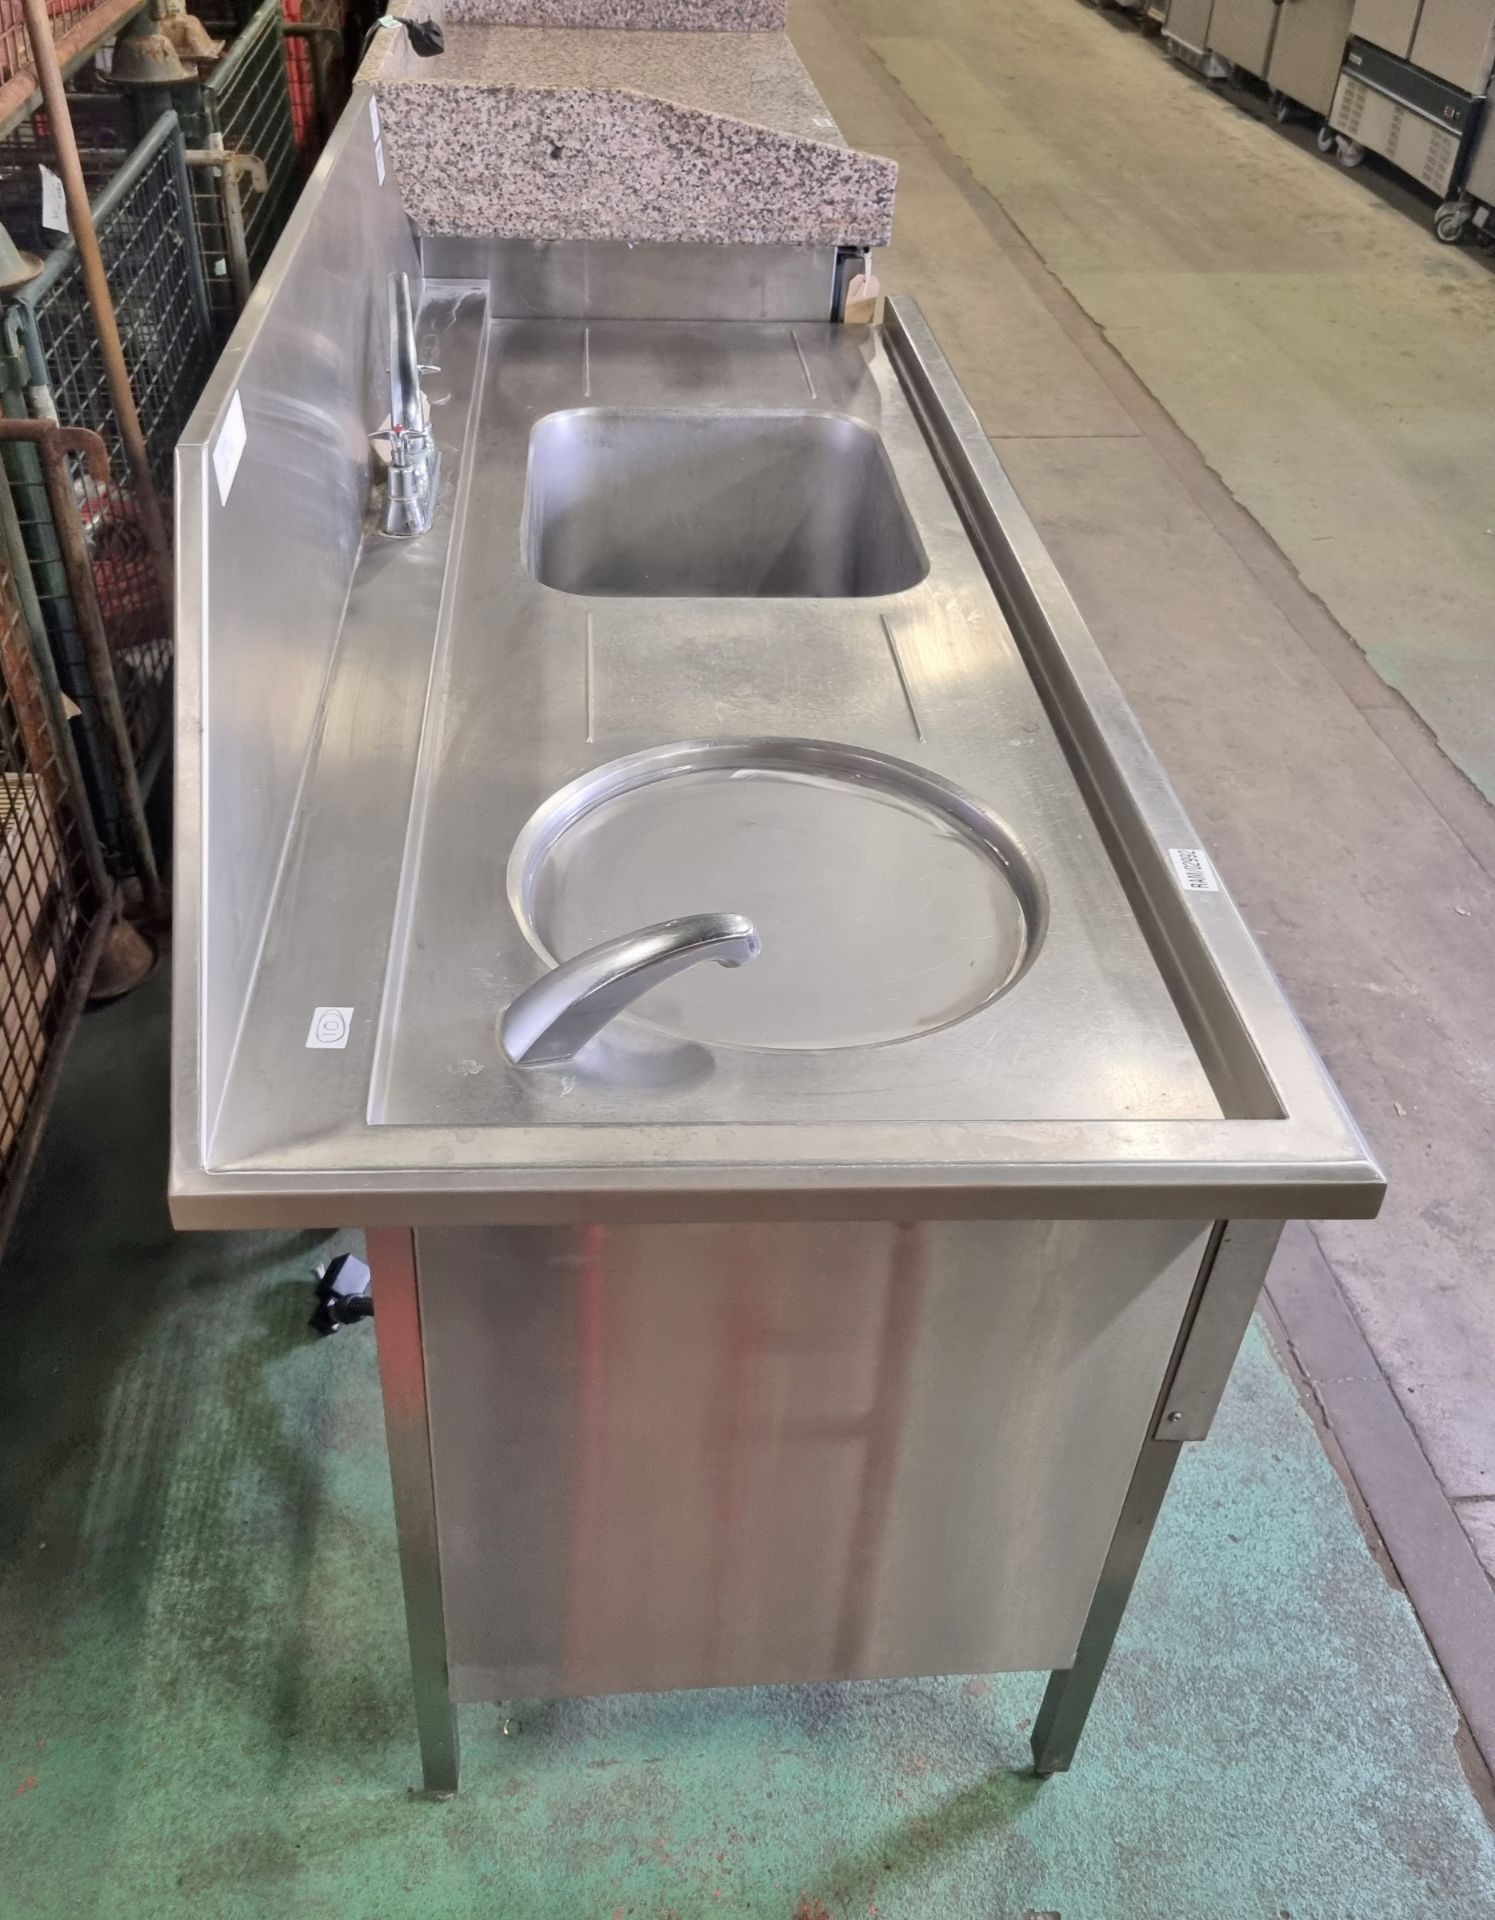 Stainless steel sink unit with waste disposal (currently sealed) - 165 x 70 x 120cm - Bild 8 aus 9